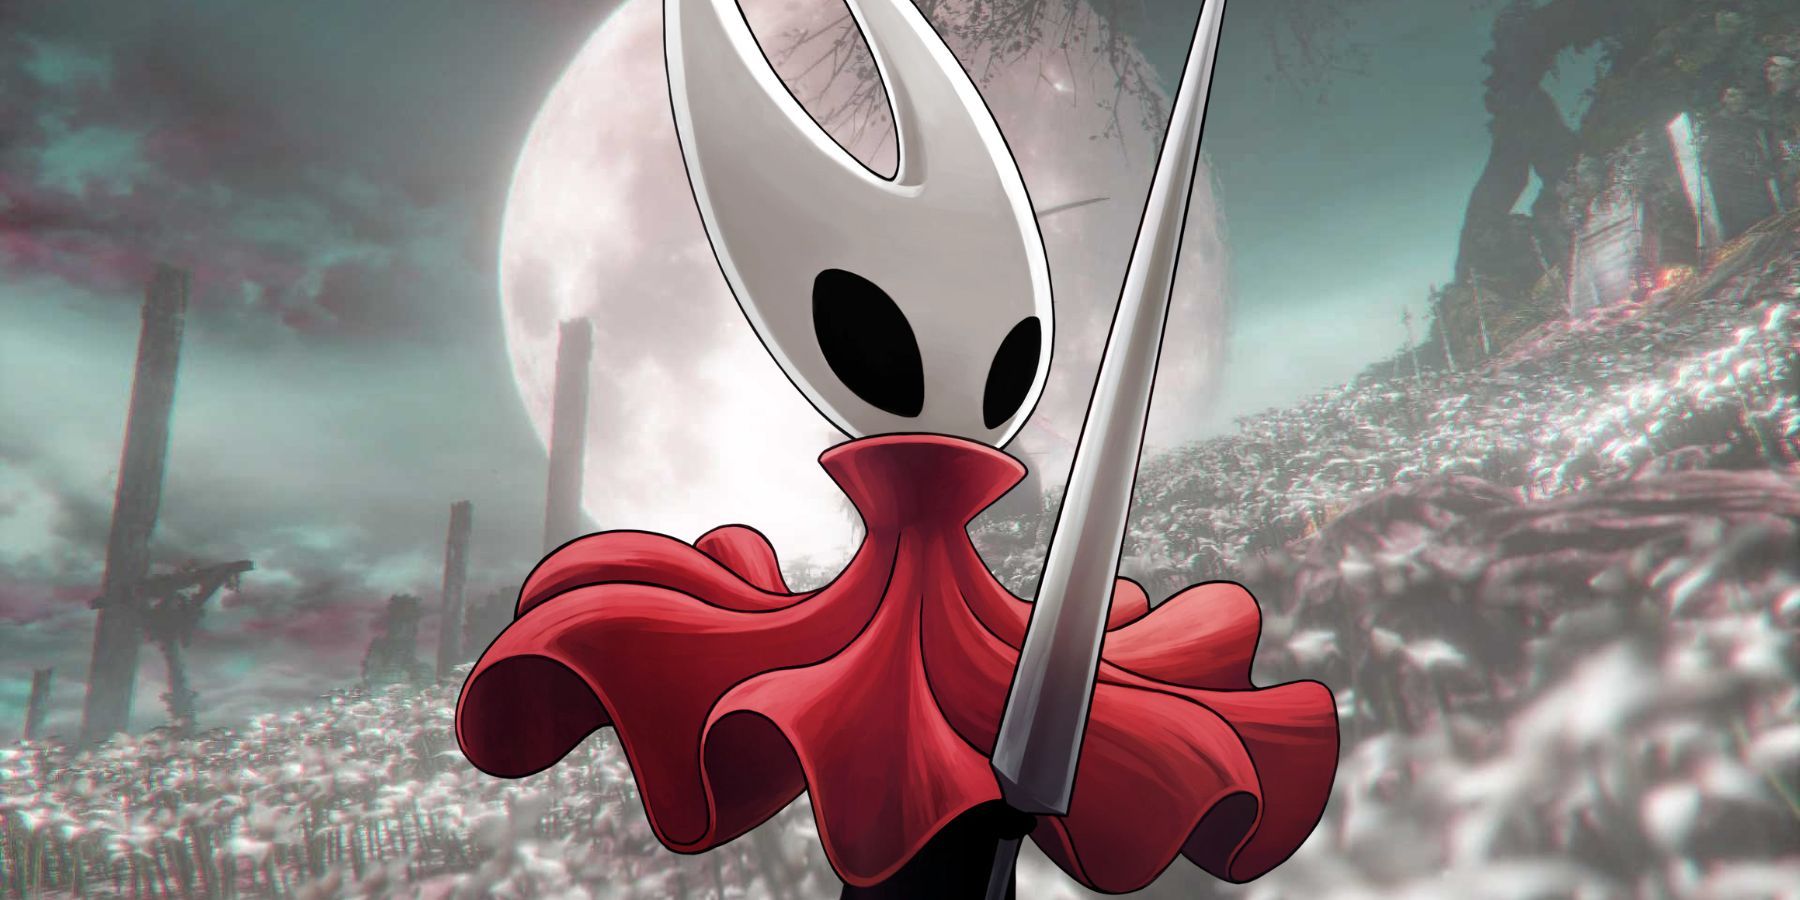 Hollow Knight: Silksong Confirmed for PS4 and PS5 - IGN